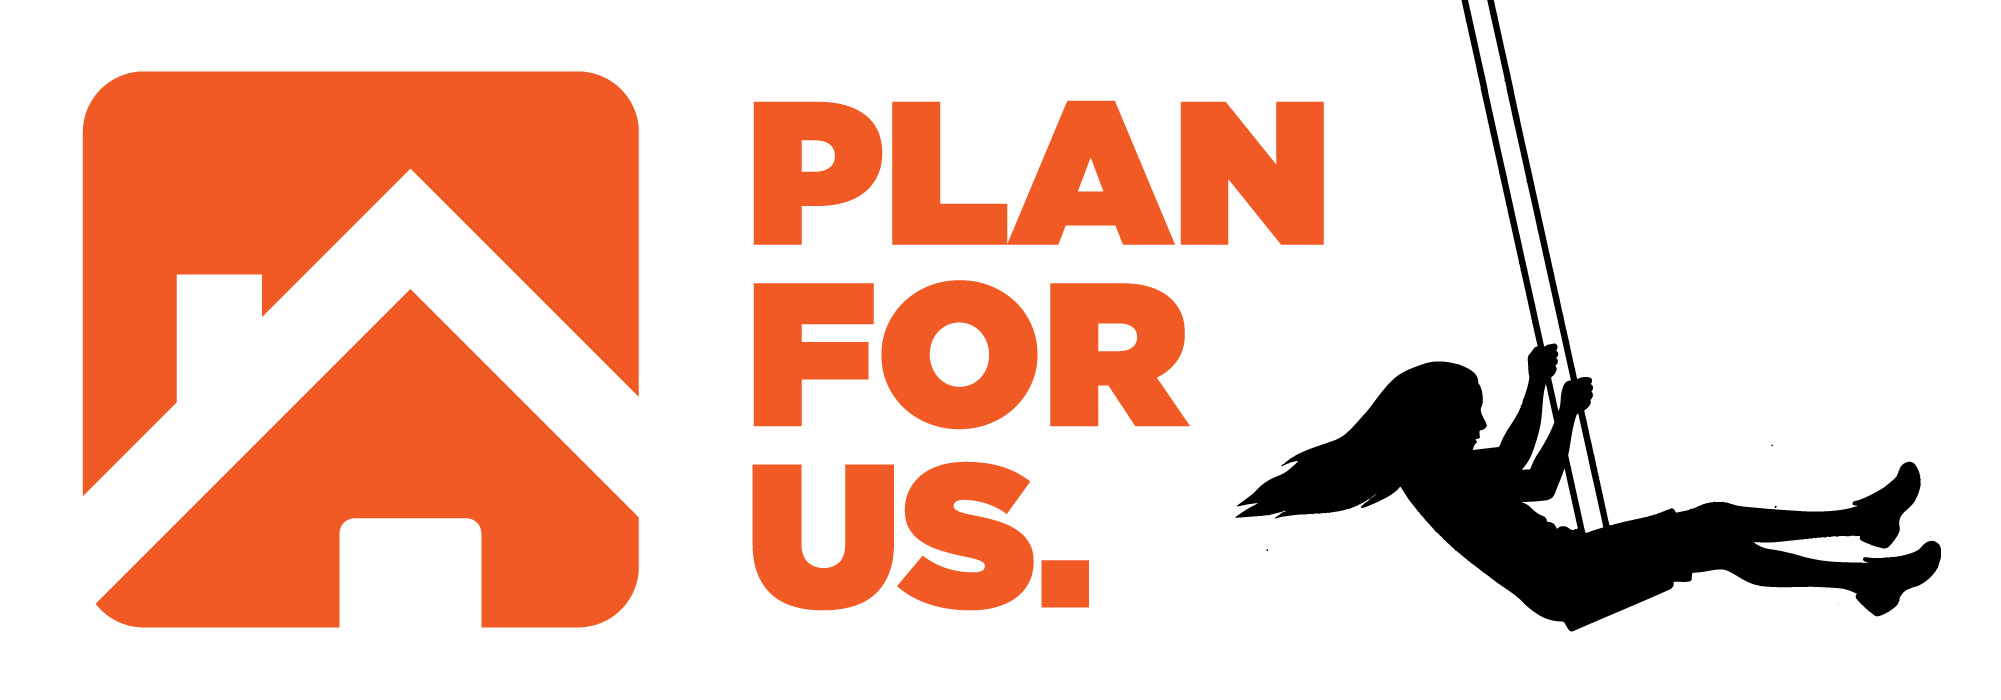 Plan For Us: South Naperville Residents Coalition